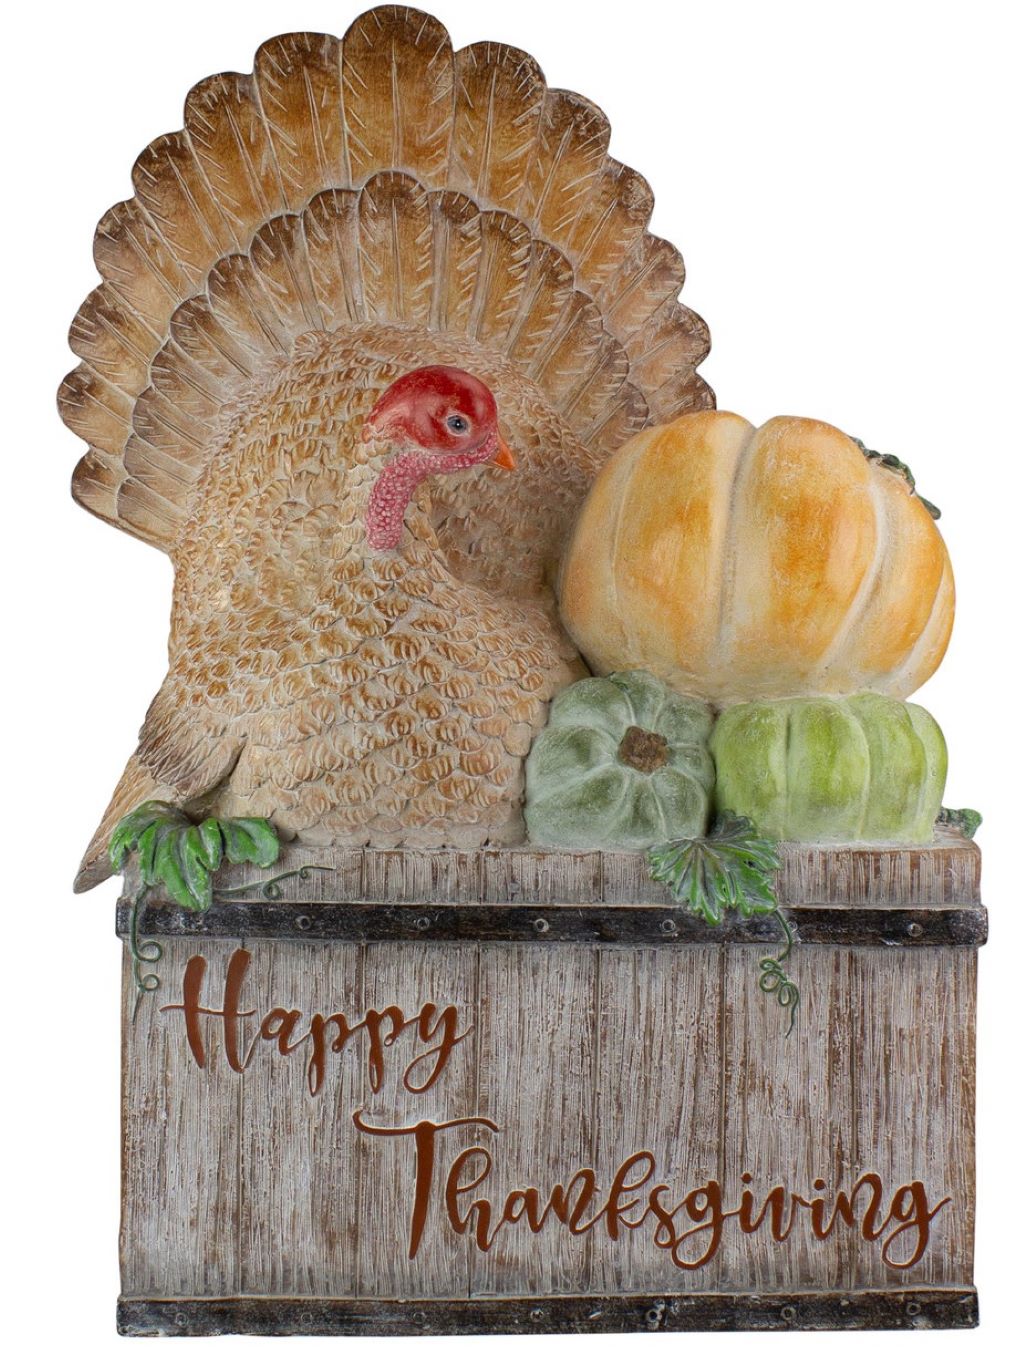 Festive and Fun Thanksgiving Turkey Decorations for Your Home